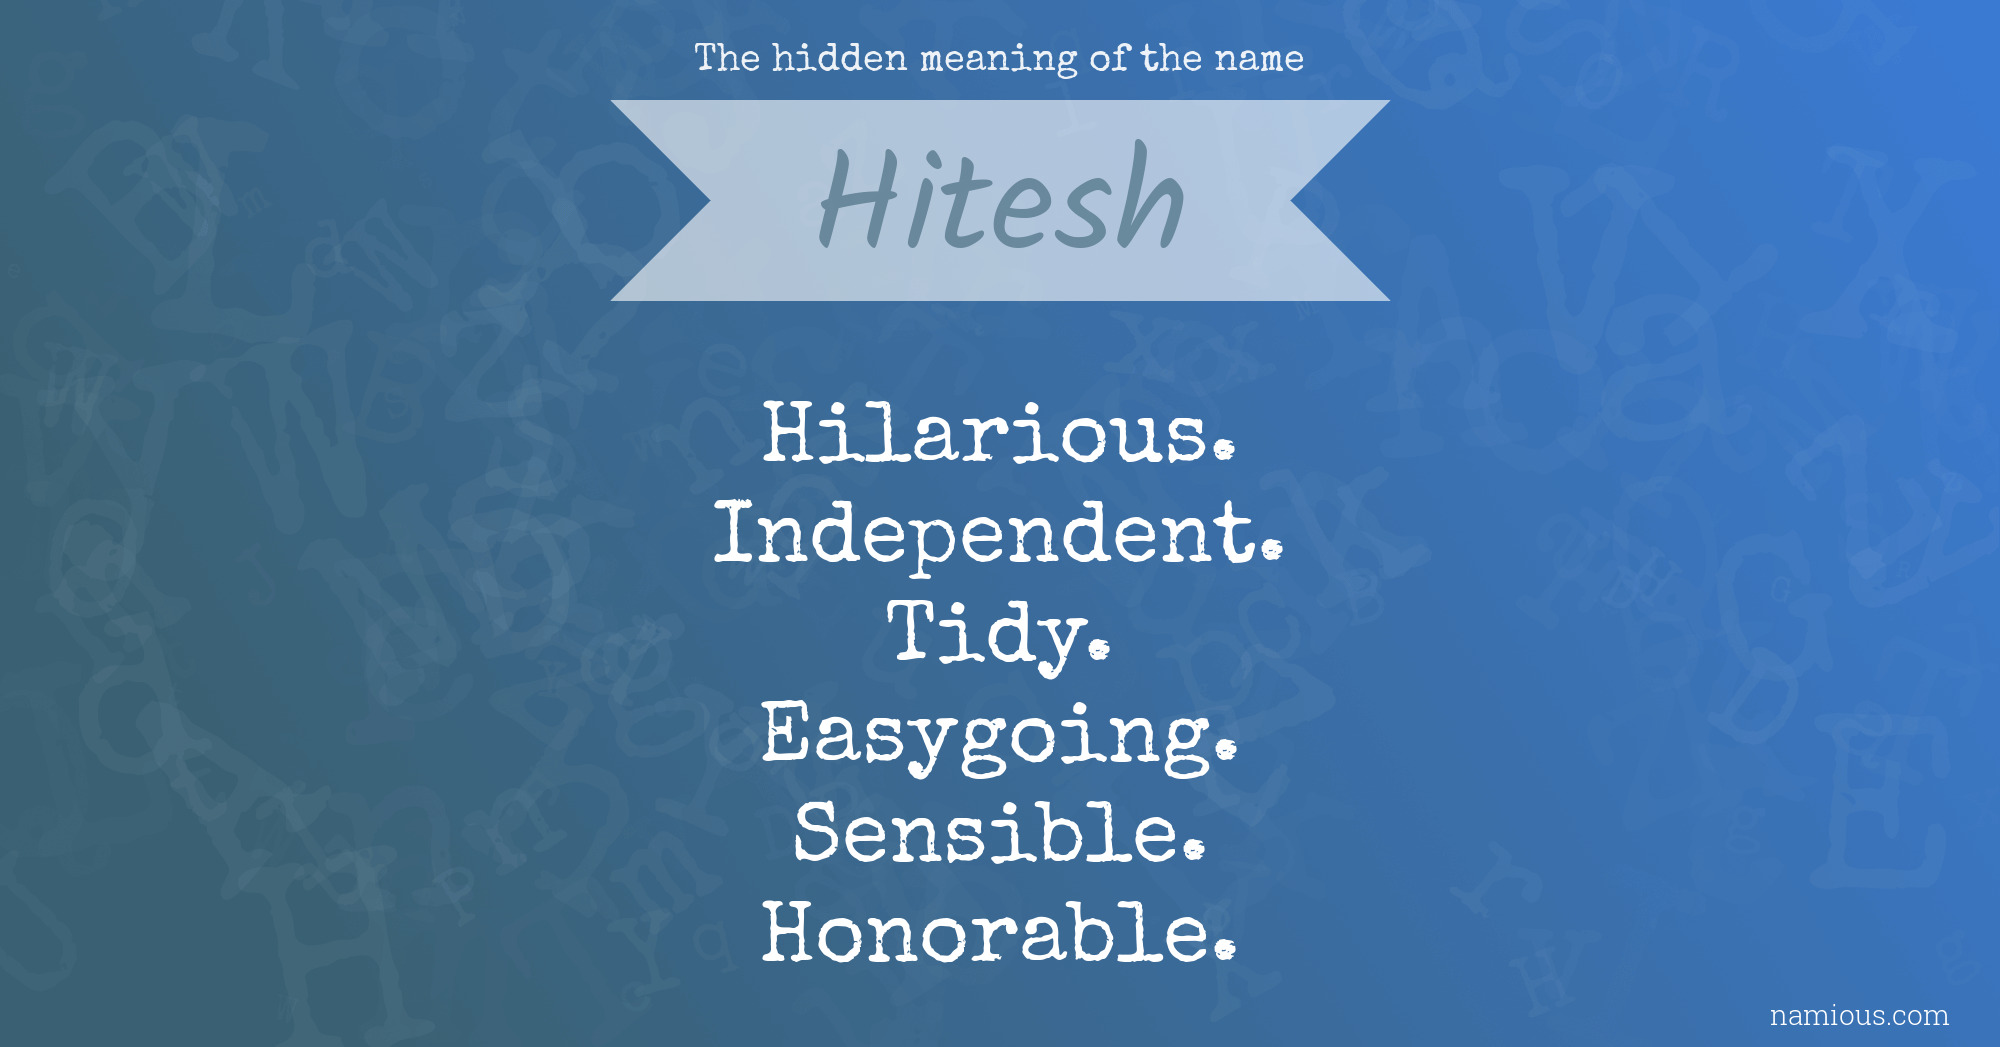 The hidden meaning of the name Hitesh